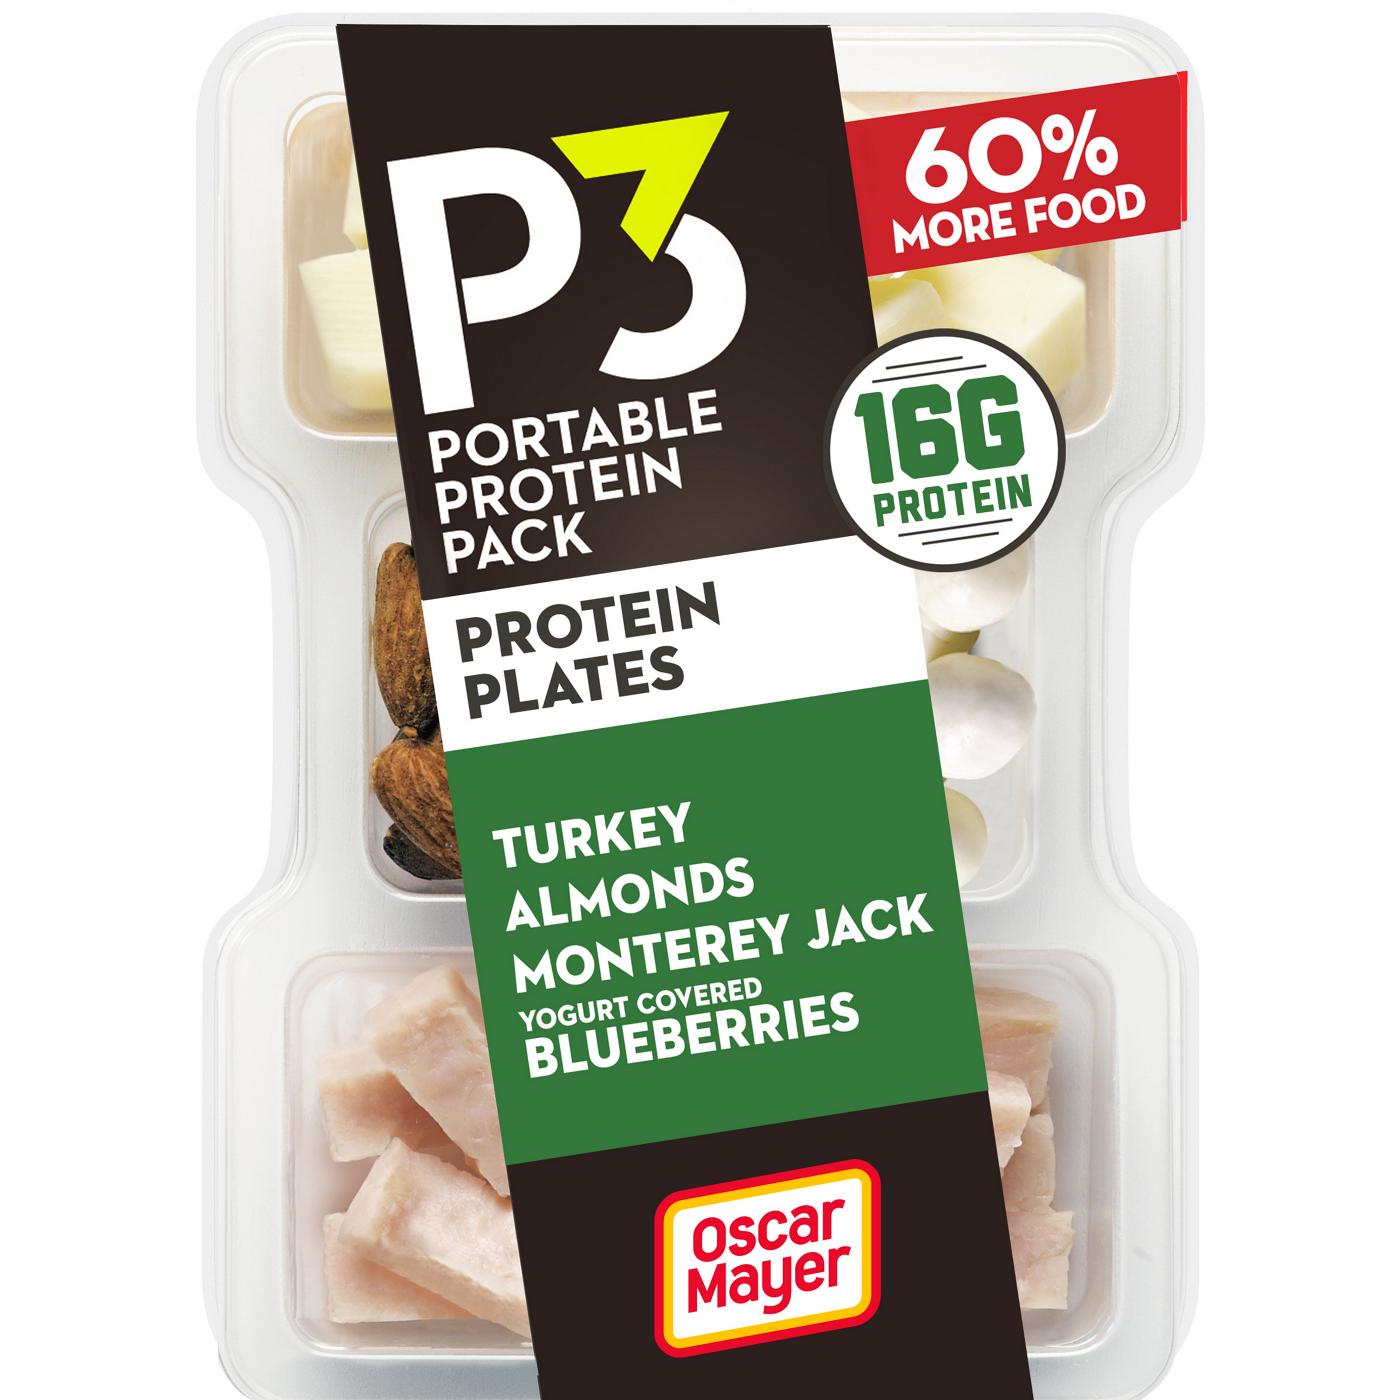 P3 Portable Protein Pack Protein Plates Snack Tray - Turkey, Almonds, Monterey Jack & Yogurt Covered Blueberries; image 1 of 4